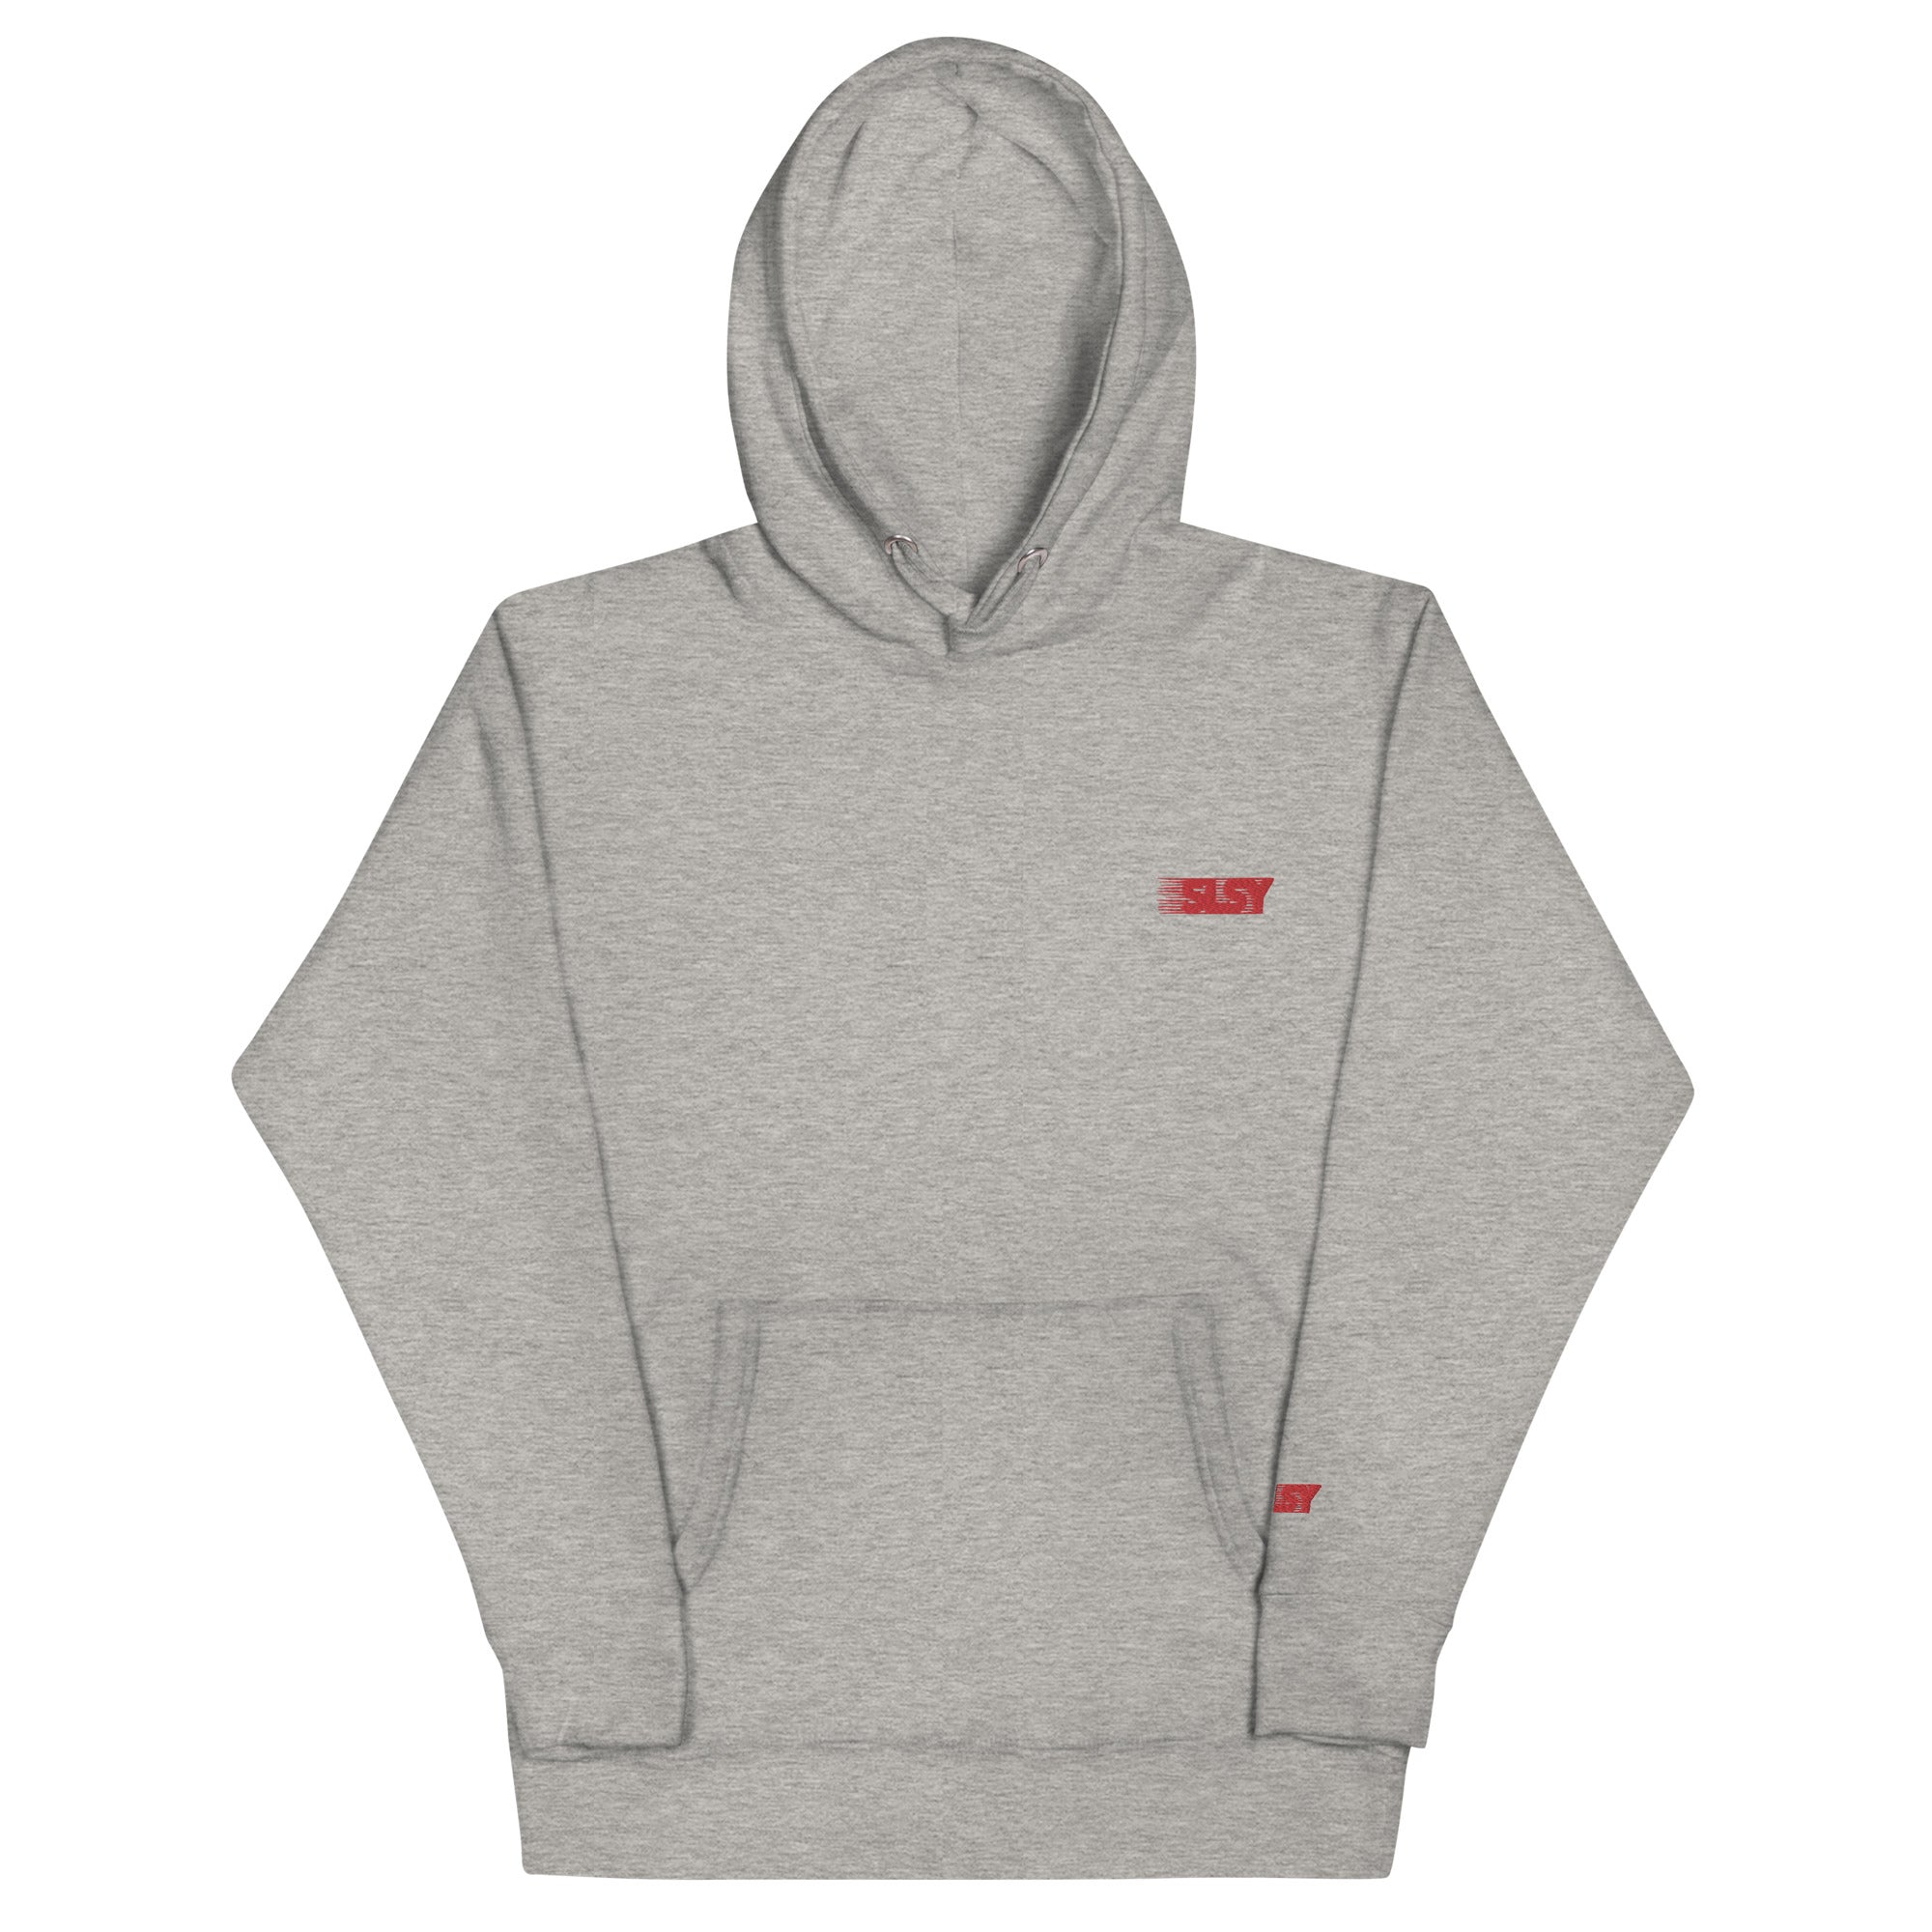 Embroidery  SLSY SPORTS Hoodie